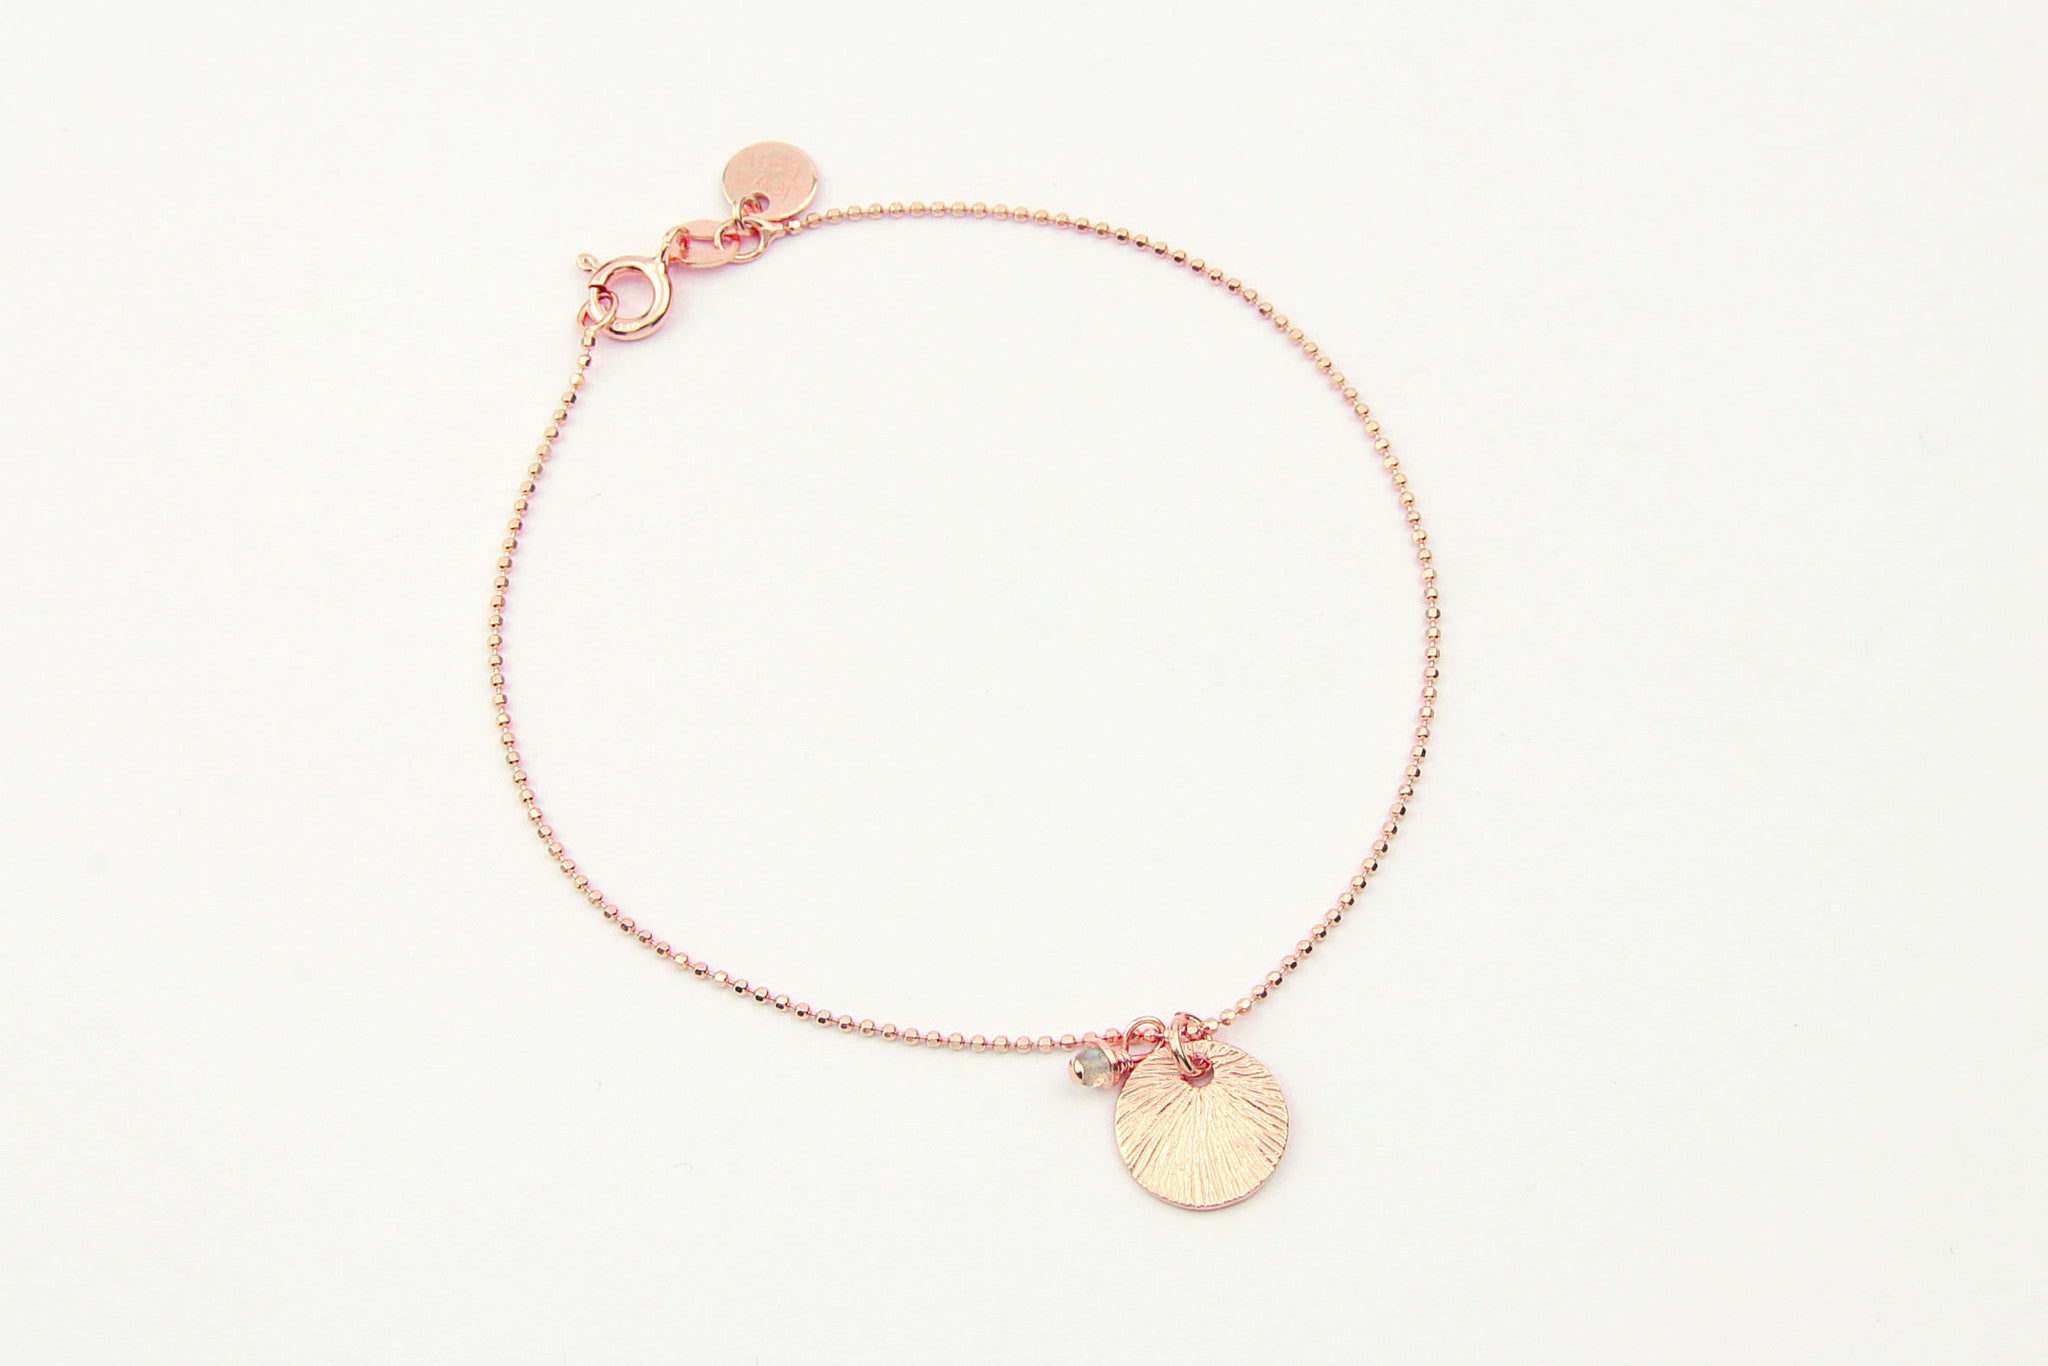 jewelberry armband bracelet small shell rose gold plated sterling silver fine jewelry handmade with love fairtrade curb chain